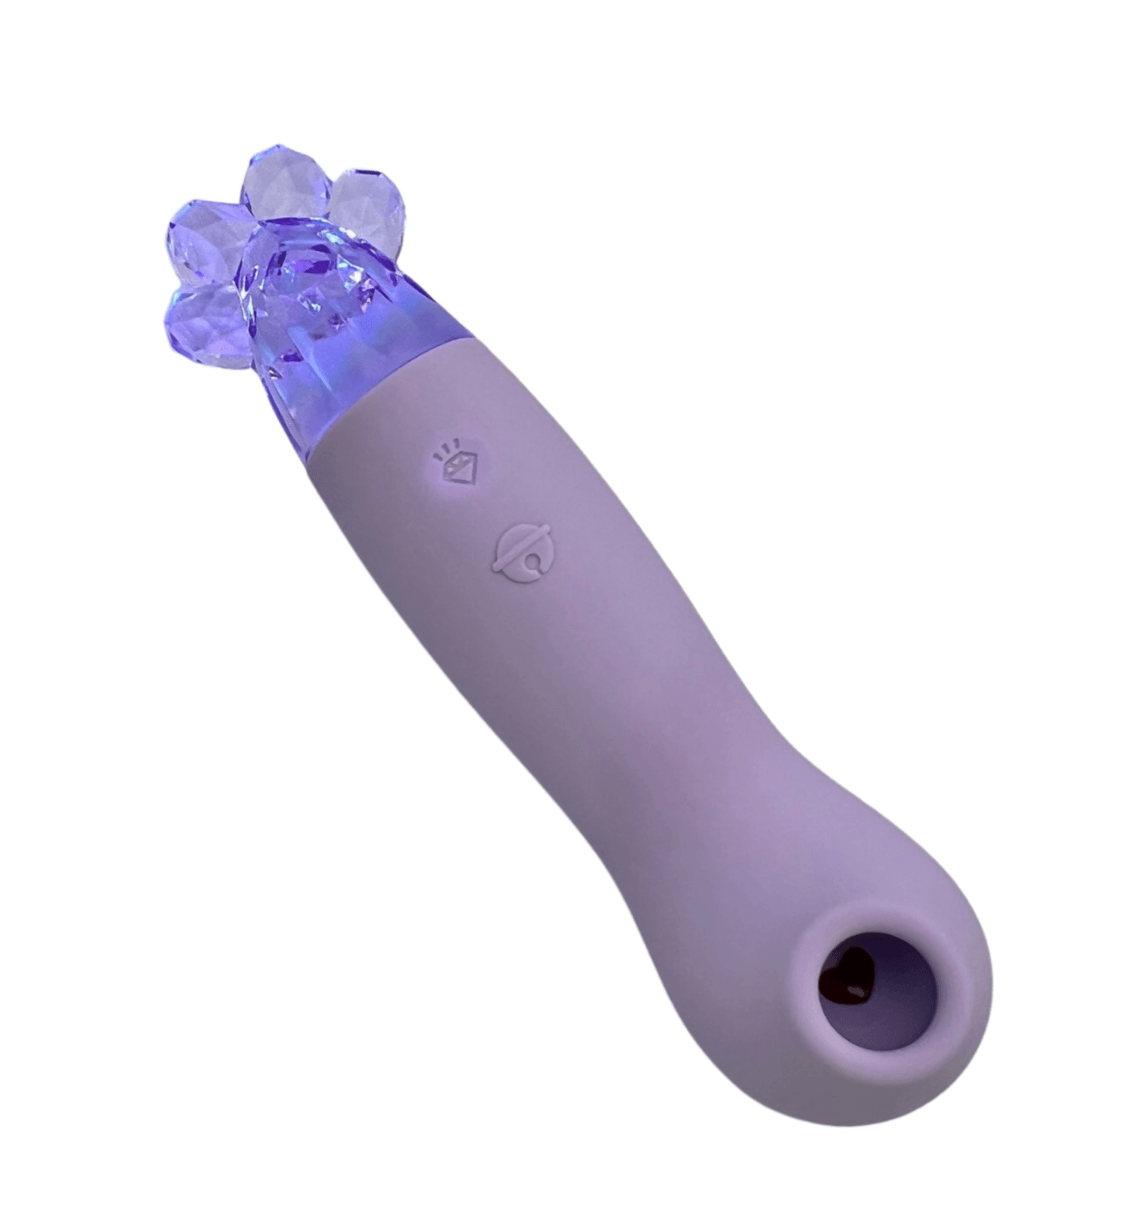 Cat's Meow Clitoral Massager - Horny Stoner